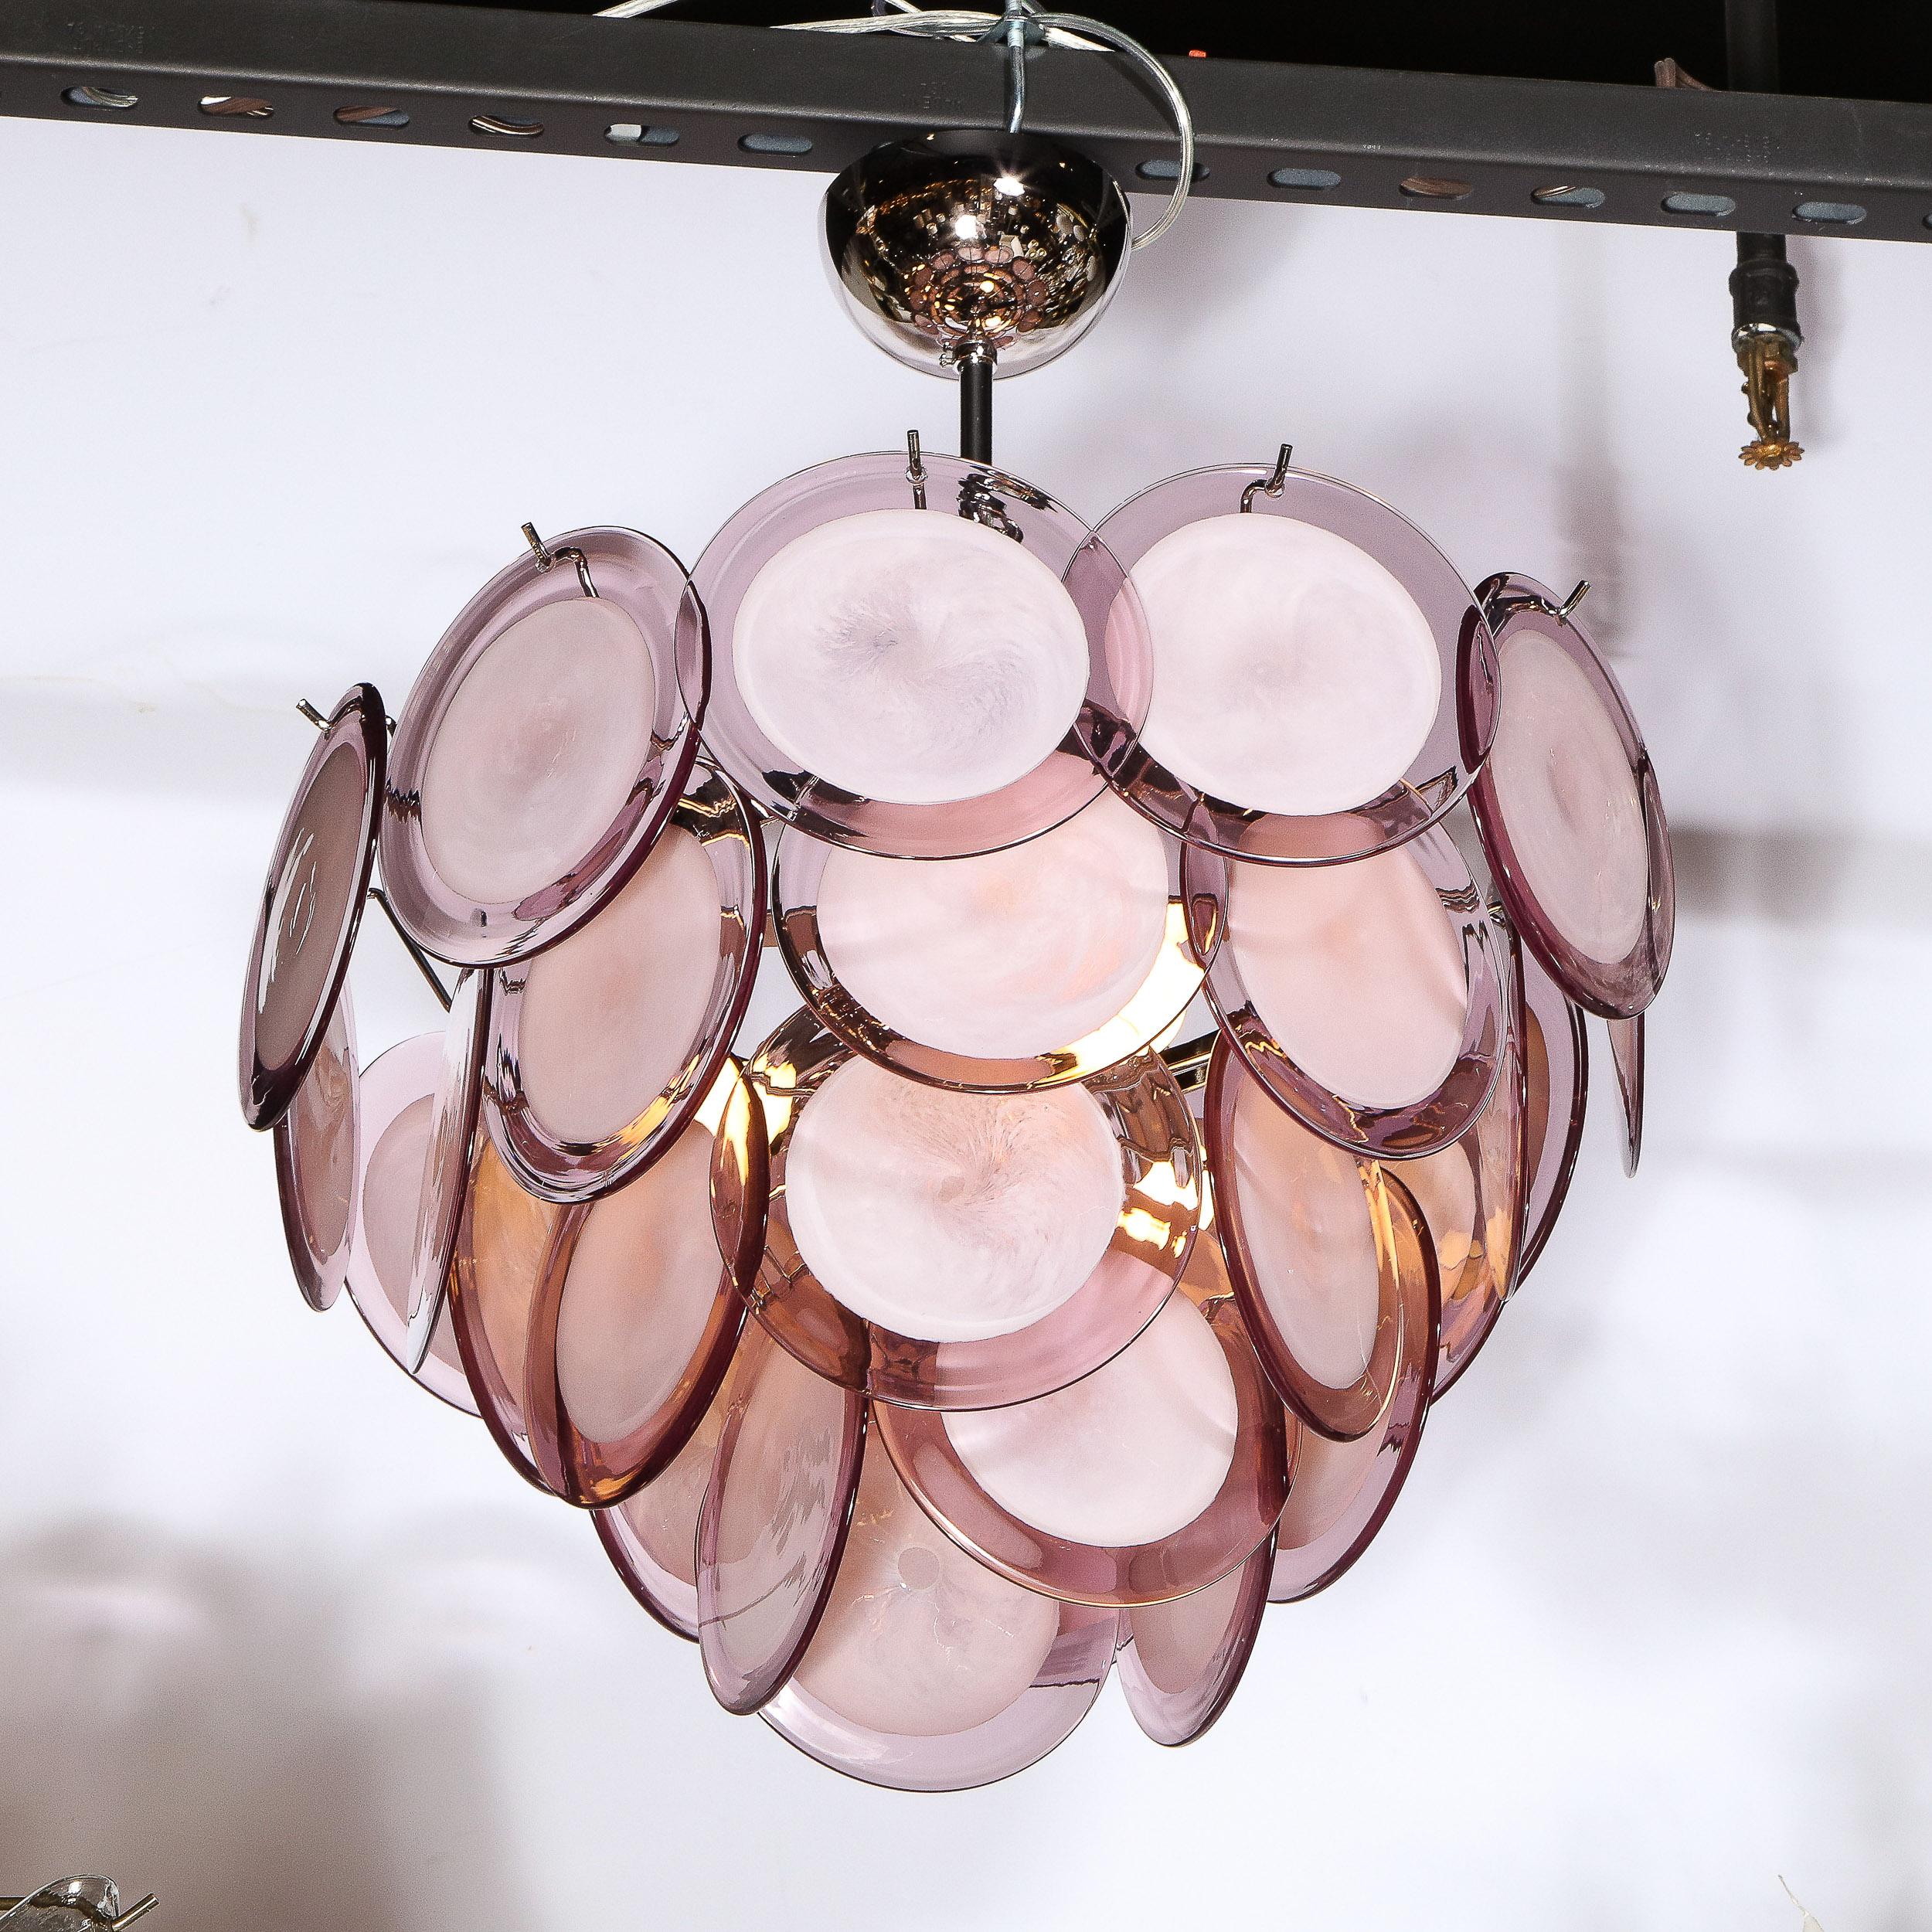 Italian Modernist Four Tier Amethyst Handblown Murano Chandelier with Chrome Fittings For Sale